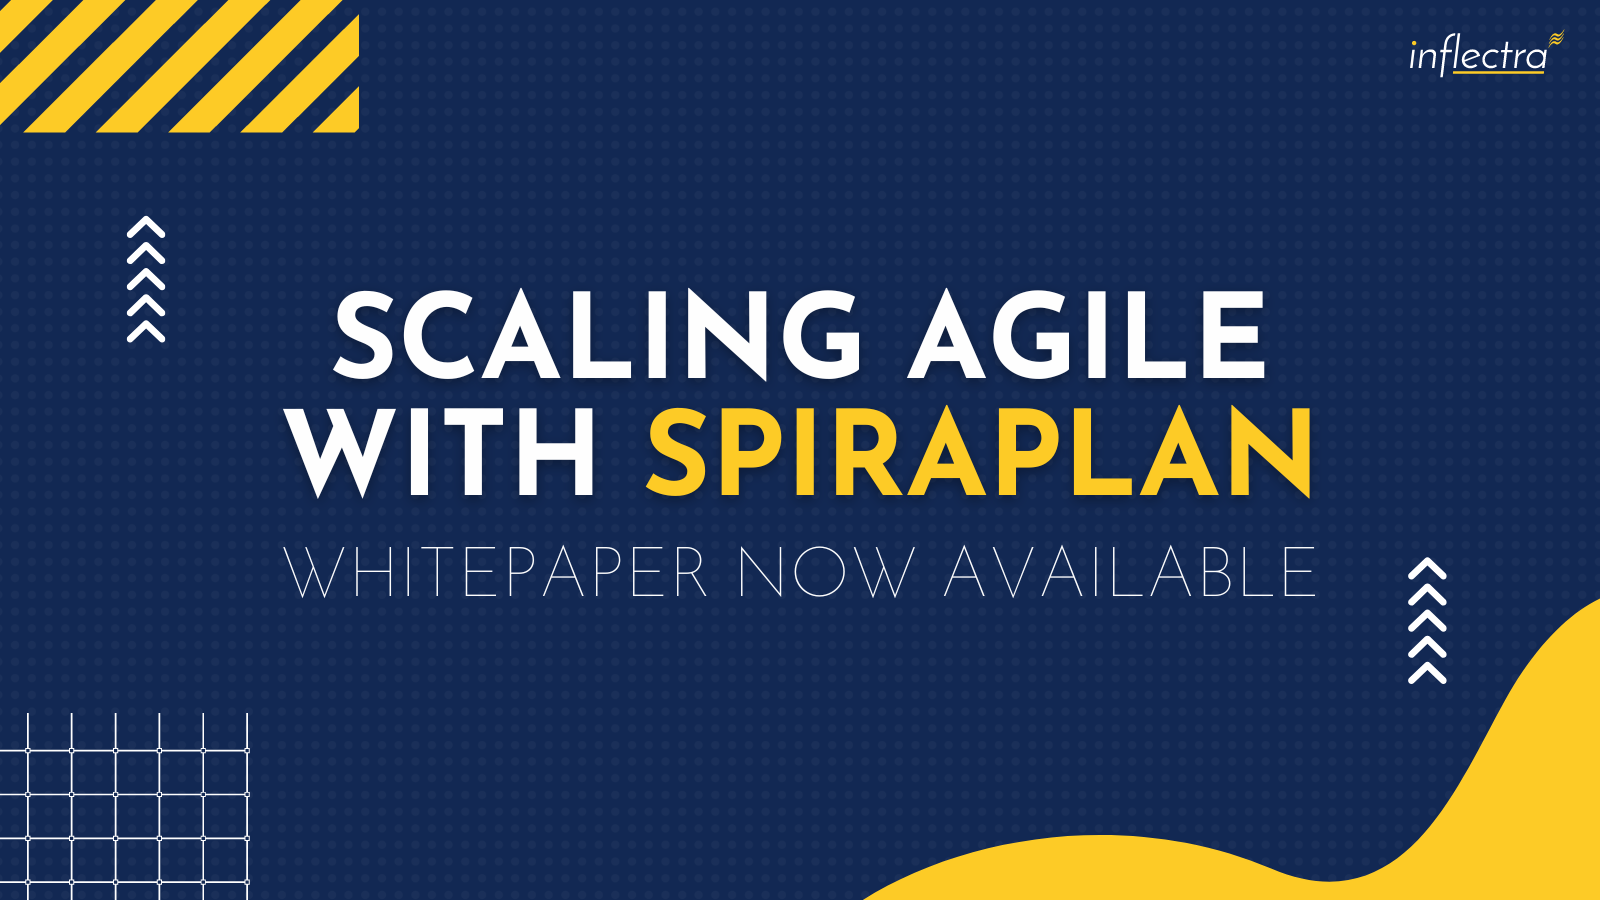 scaling-agile-with-spiraplan-whitepaper-now-available-inflectra-image